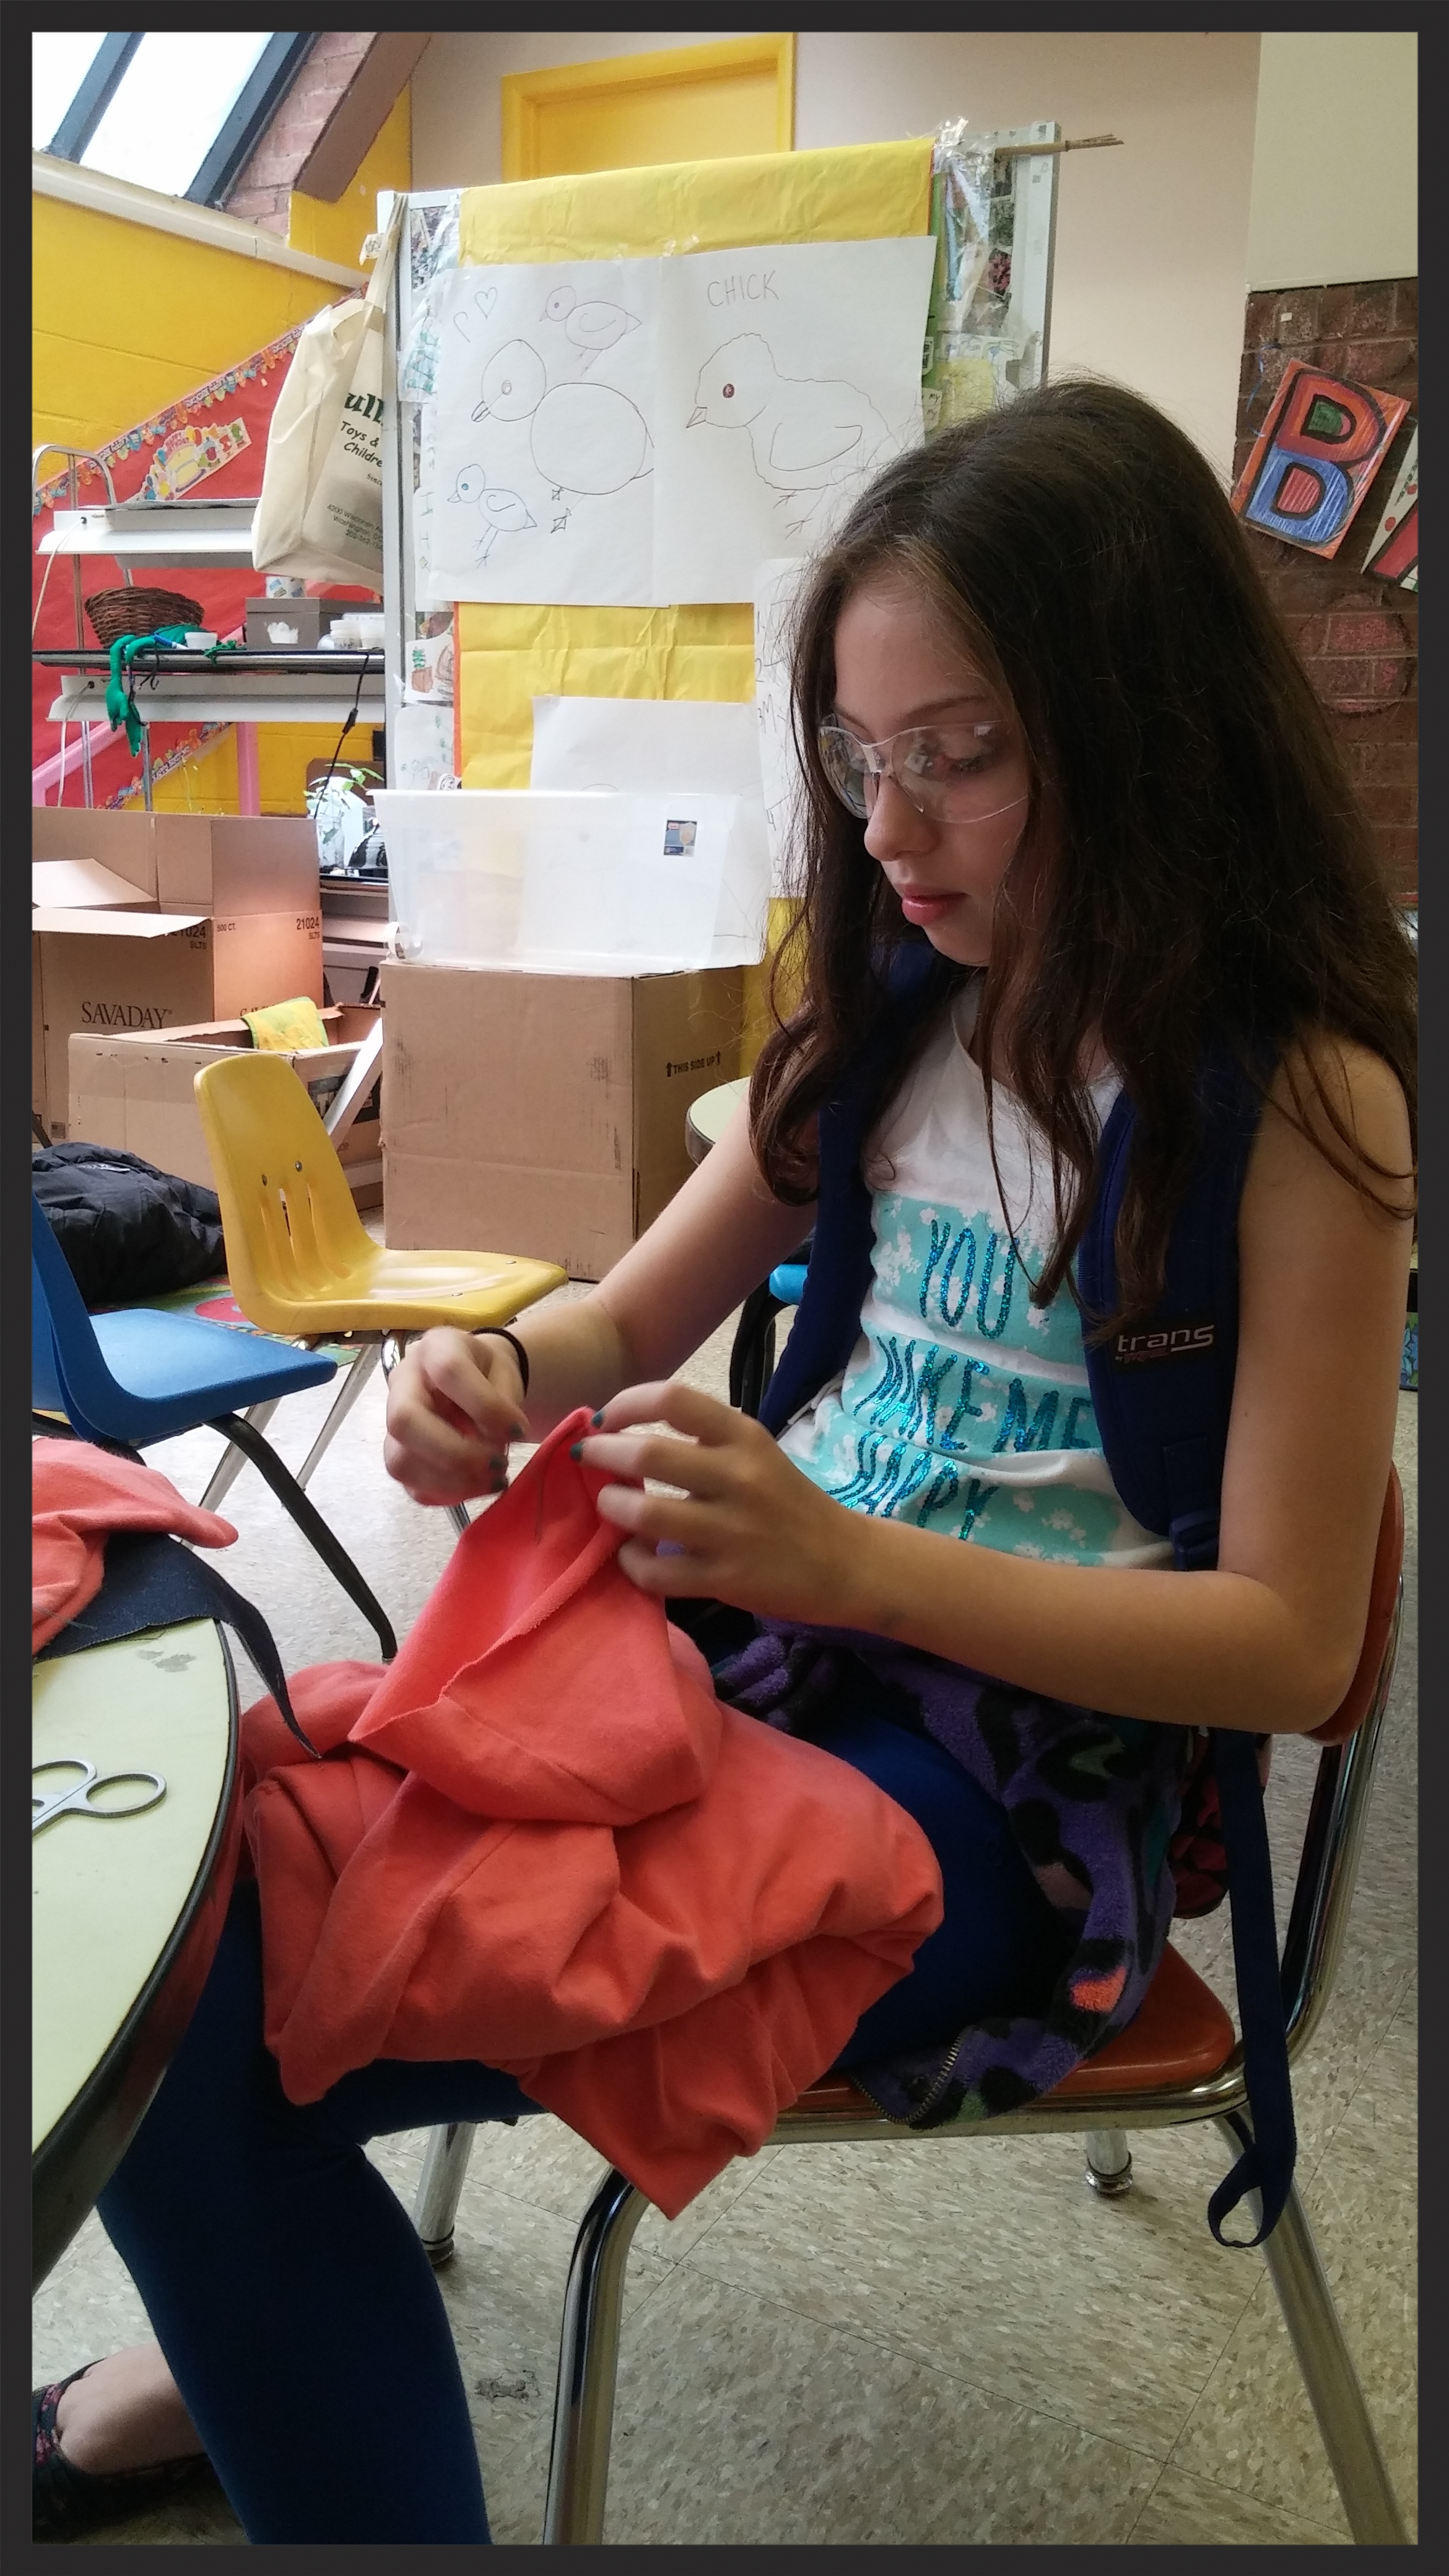  A student makes modifications to her jacket in order to turn it into, "The World's Best Jacket!" 